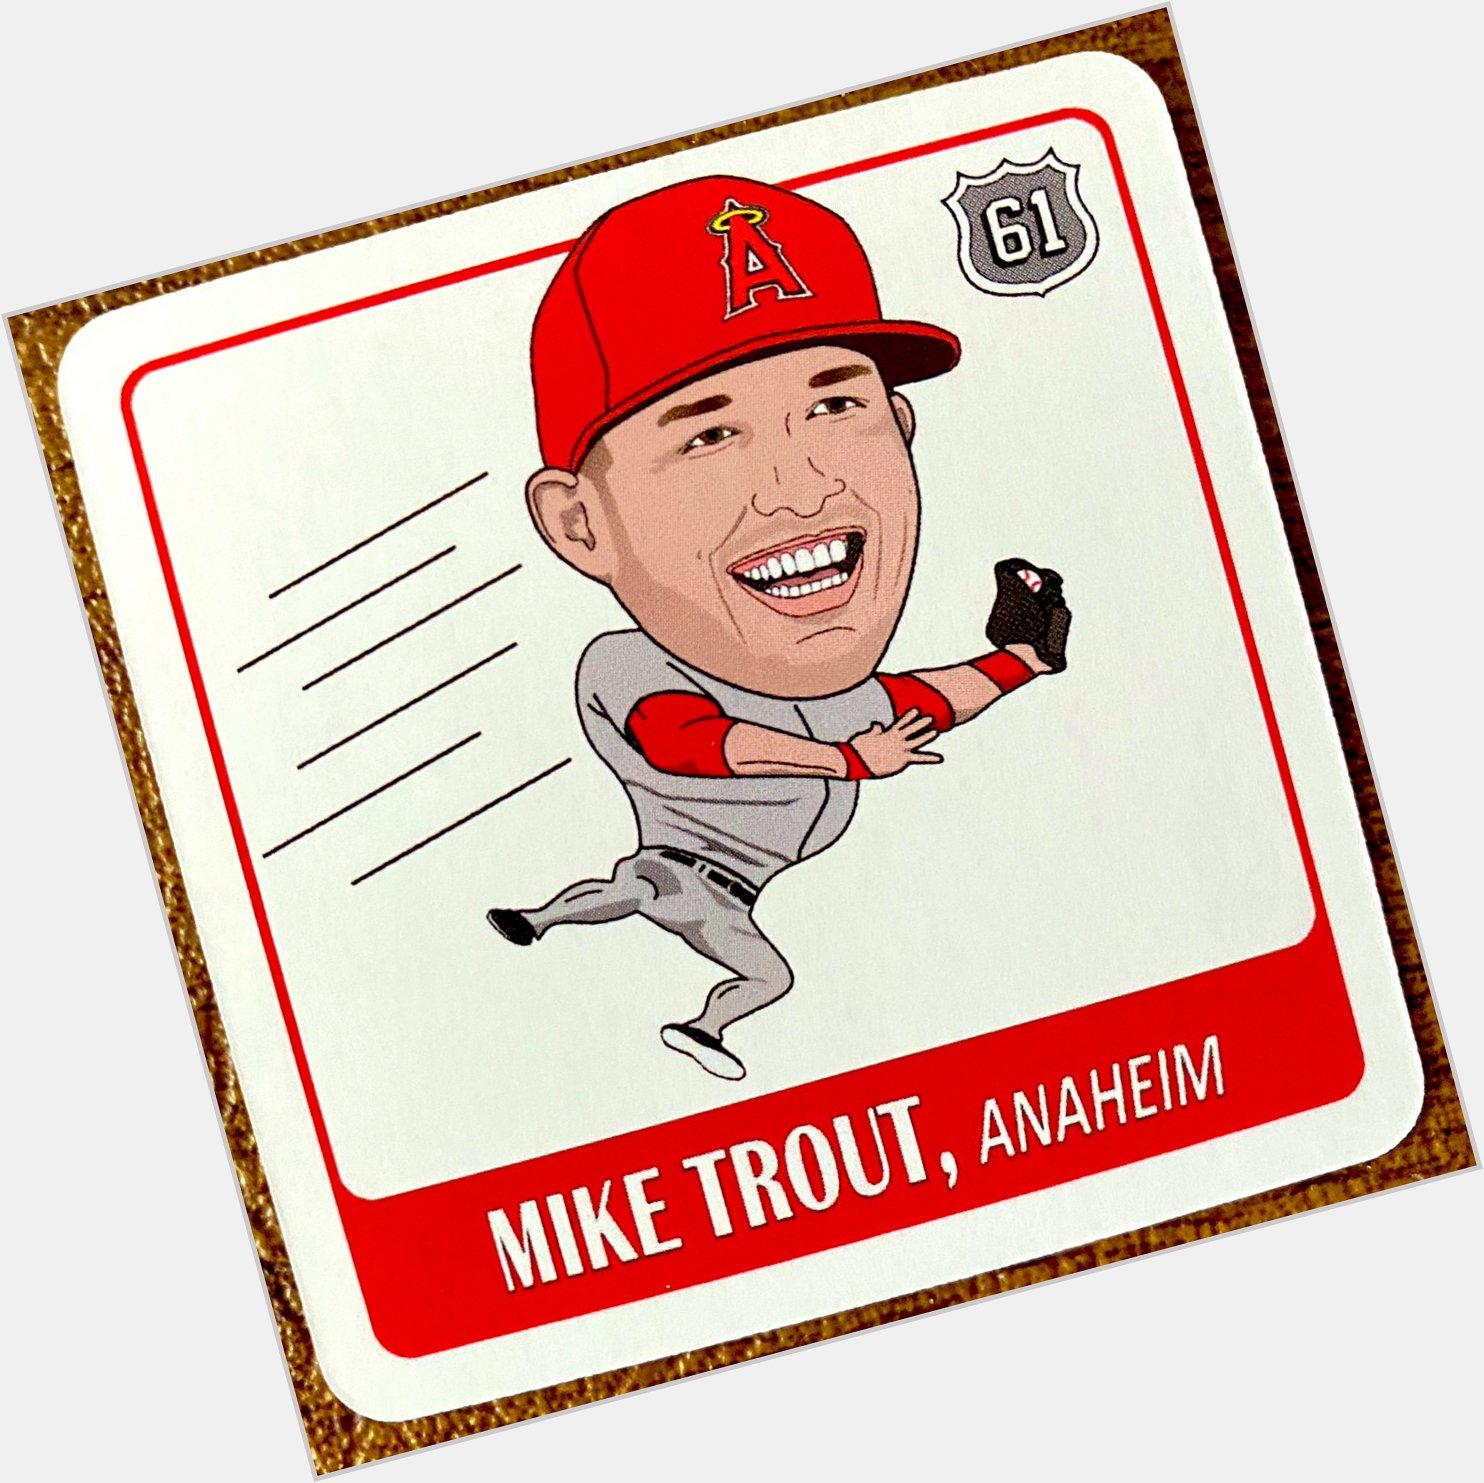 Happy 30th birthday to Mike Trout! 